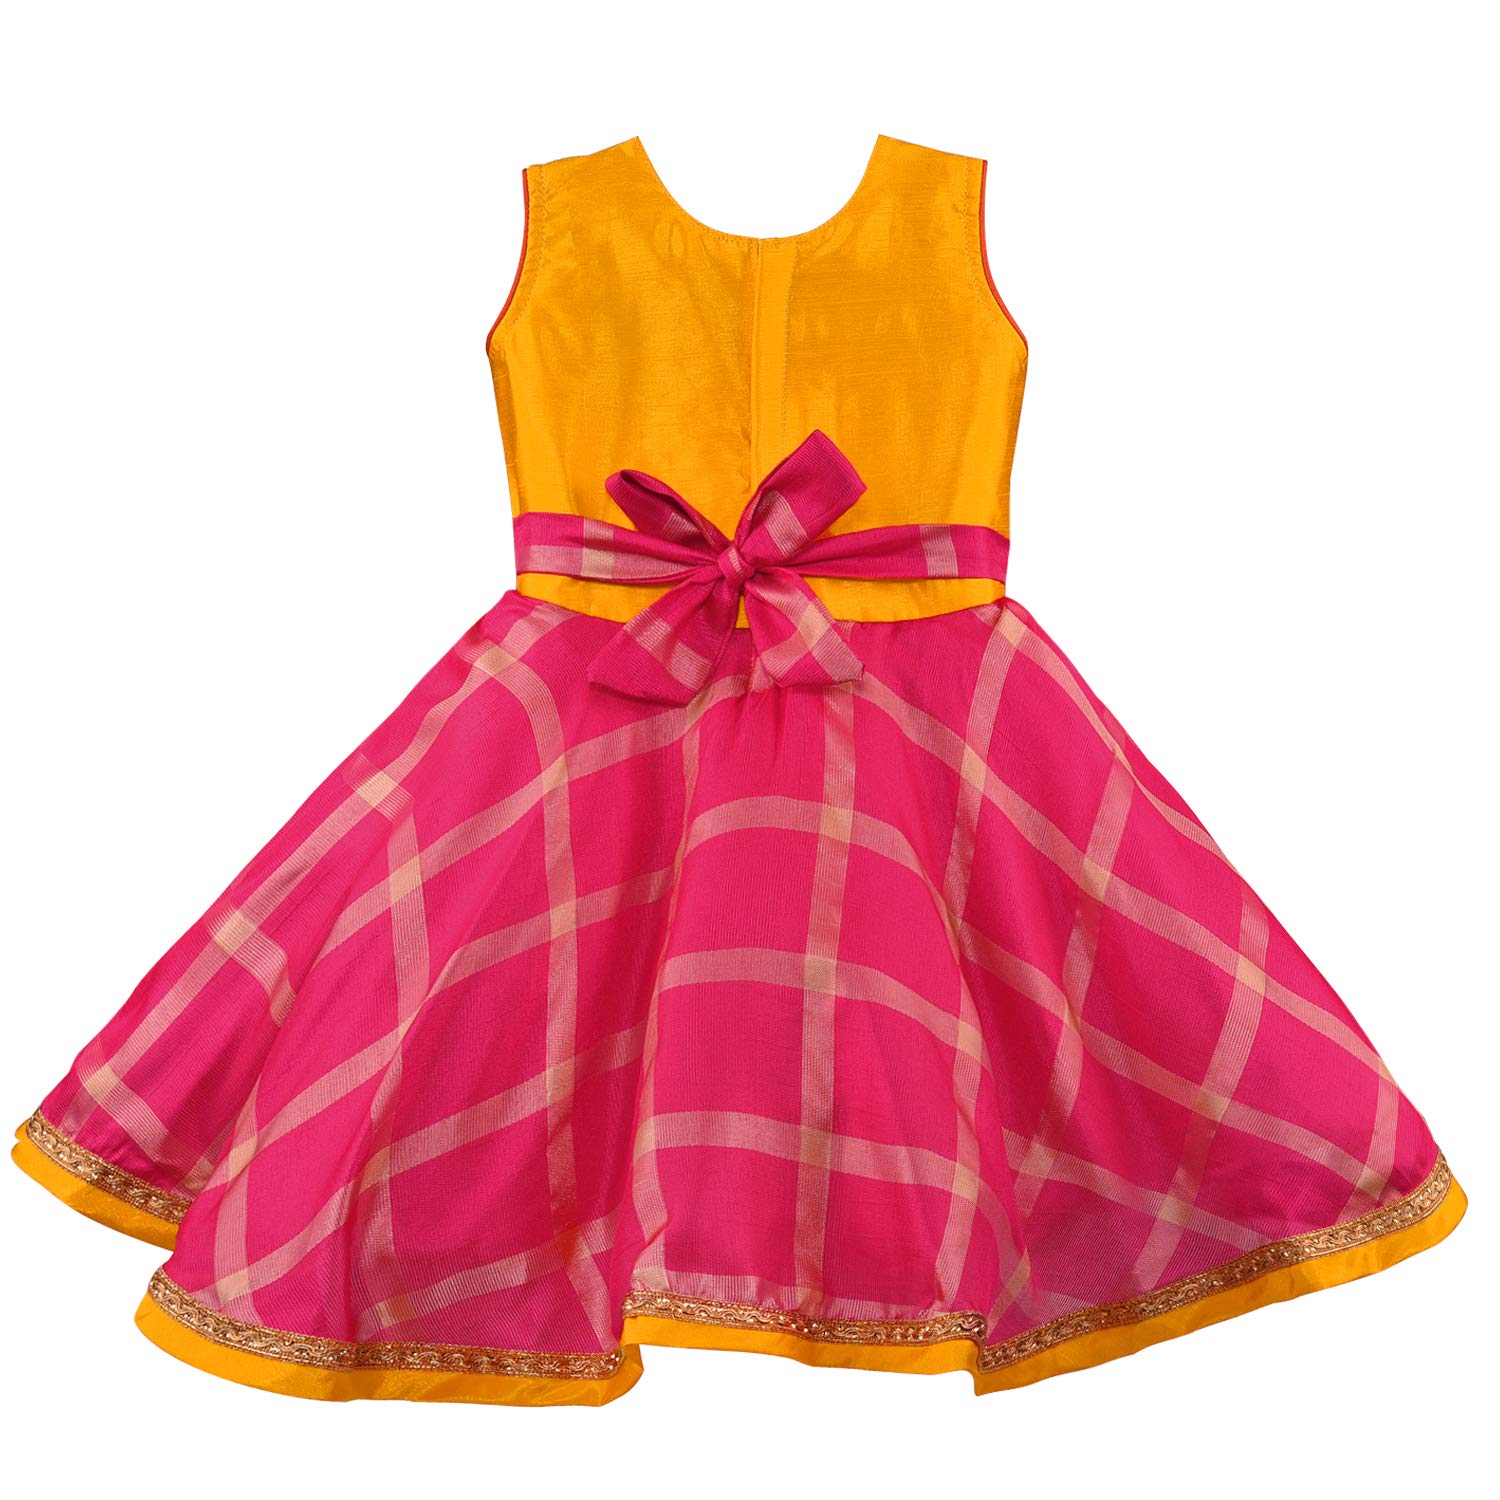 Baby Girls Party Wear Frock Birthday Dress For Girls bxa242y - Wish Karo Party Wear - frocks Party Wear - baby dress